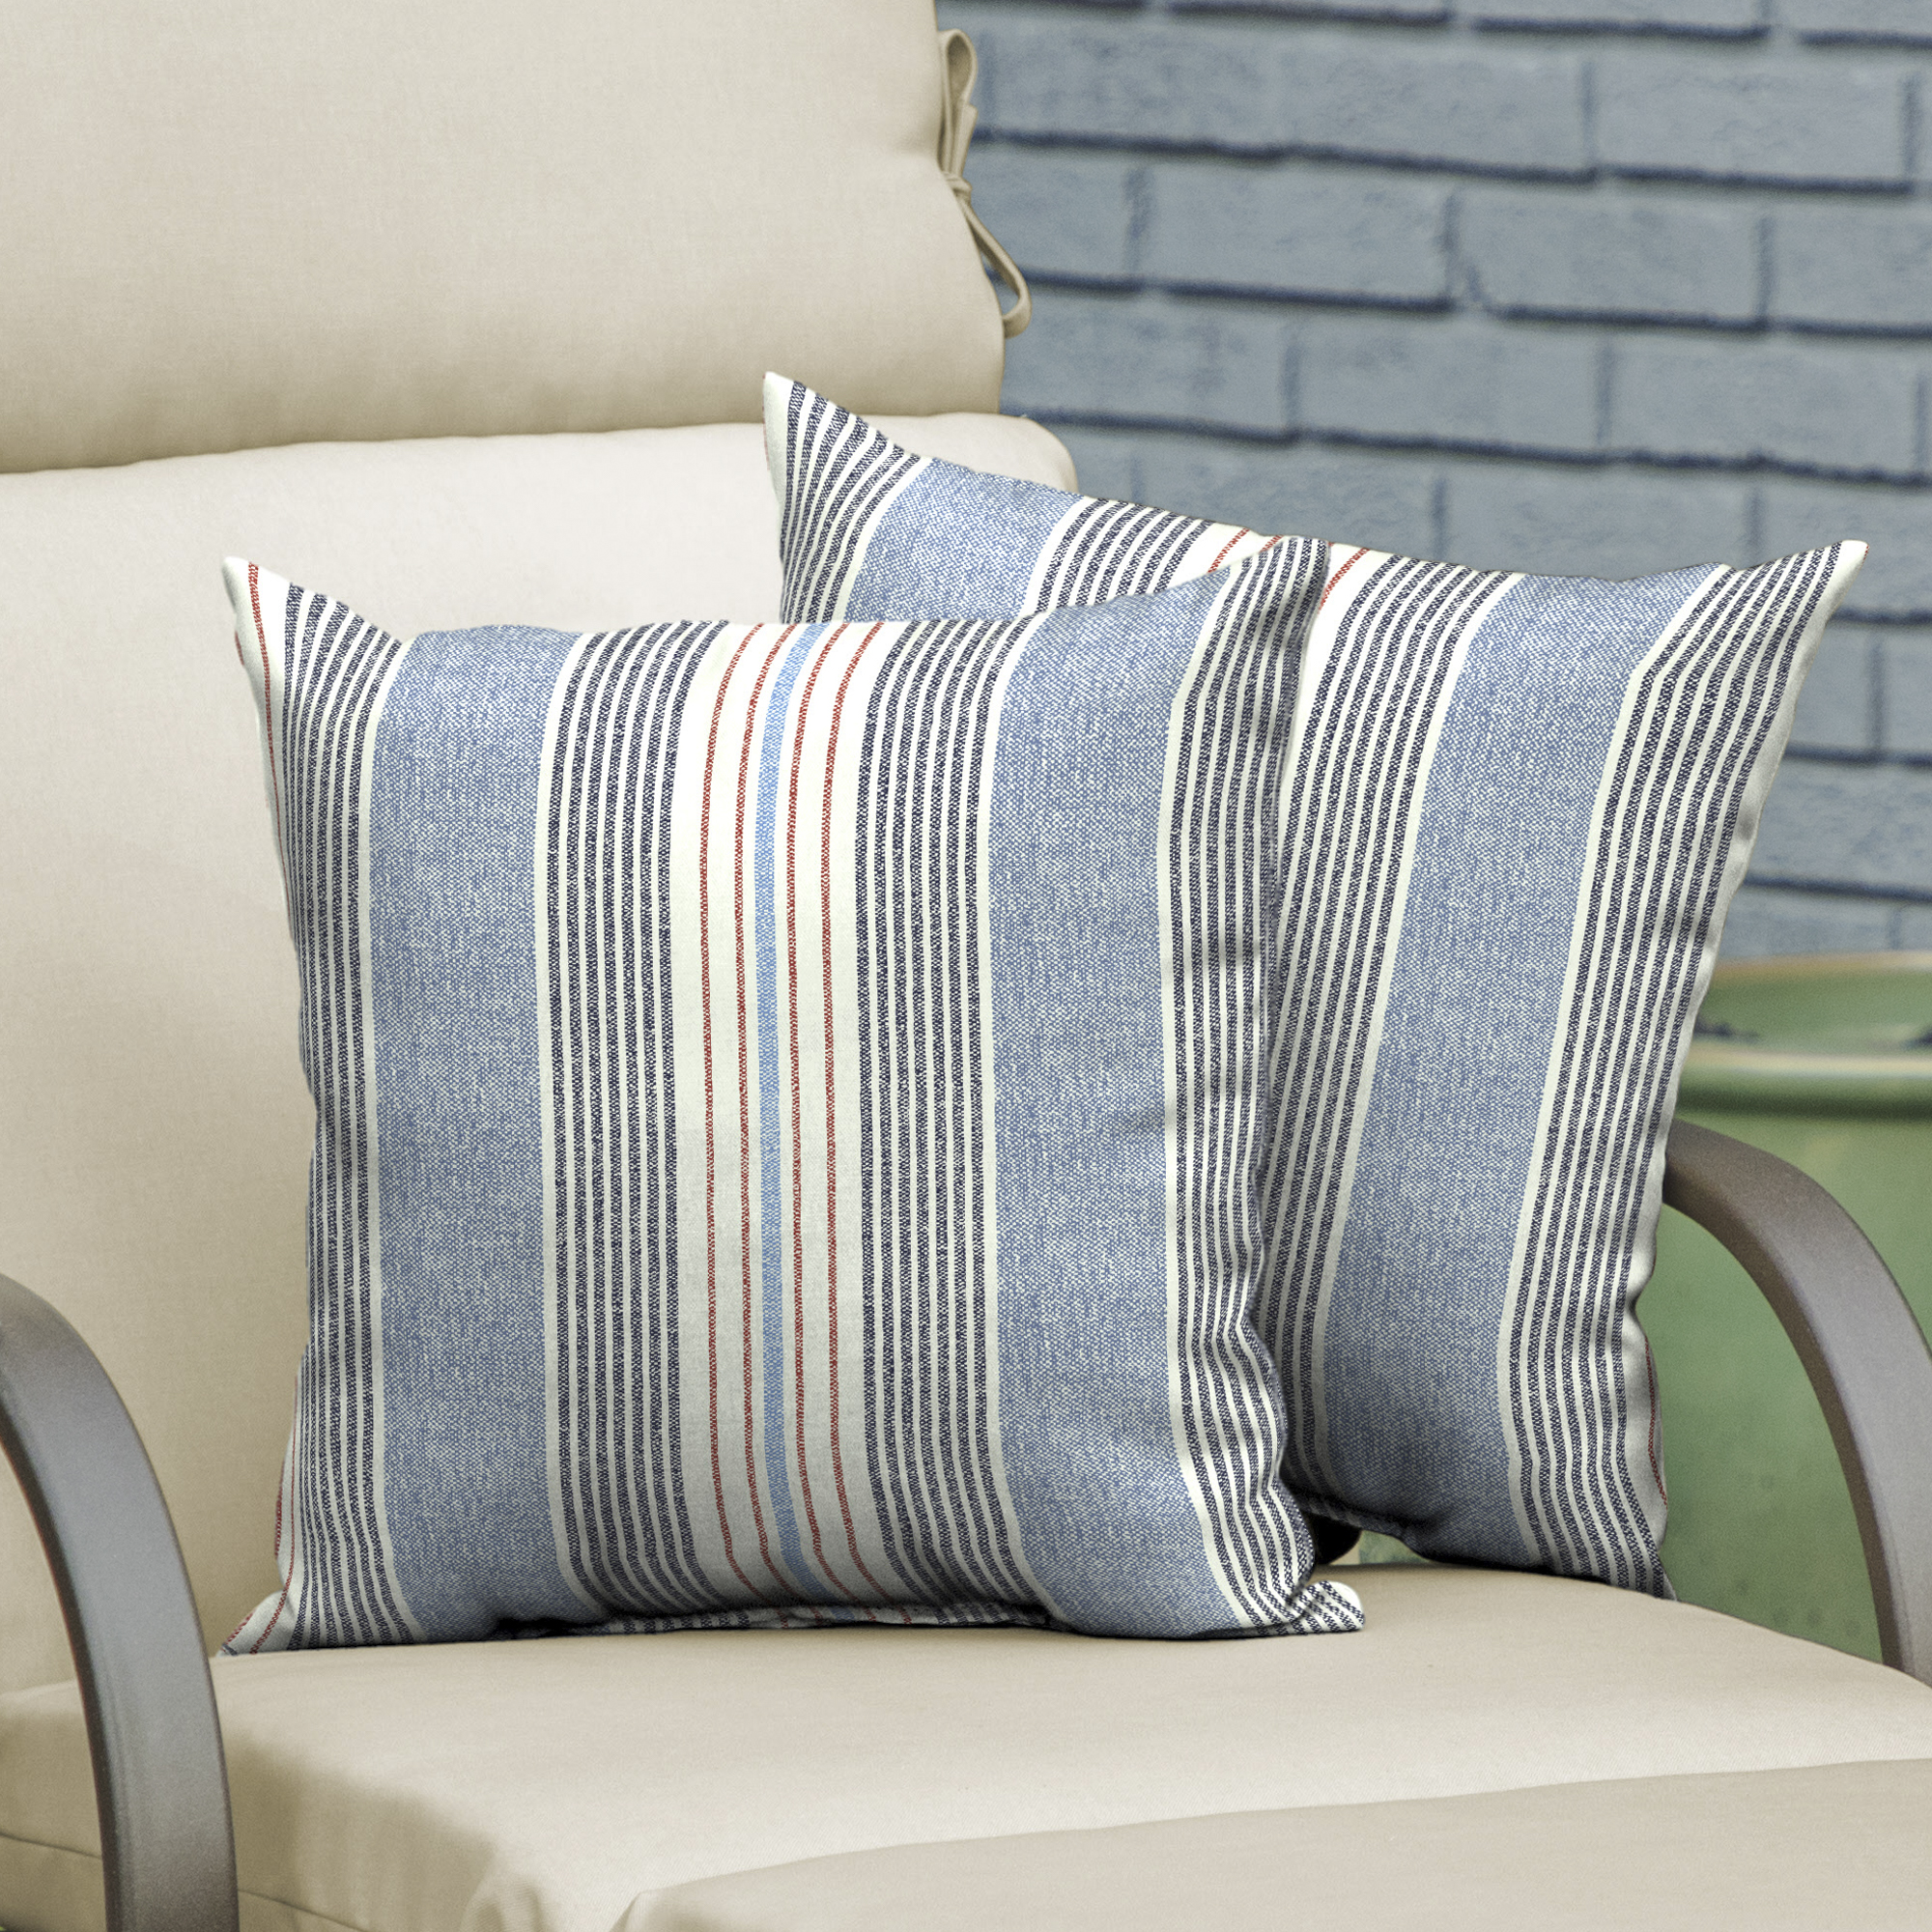 Better Homes & Gardens Hickory Stripe 16 x 16 in. Outdoor Pillow, Set of 2 - image 5 of 7